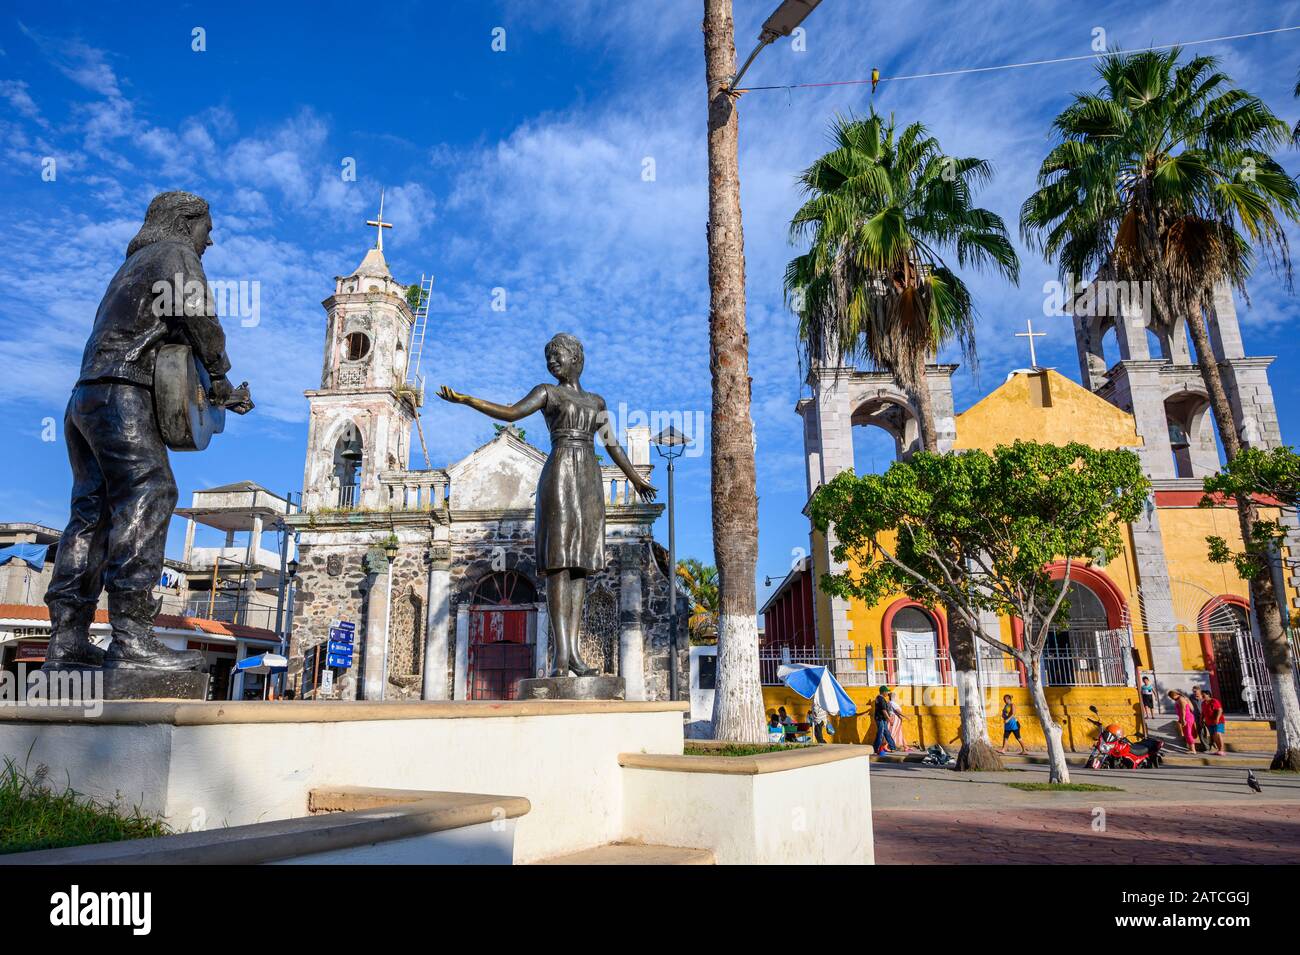 Statues in the plaza and the churches of San Blas, Riviera Nayarit, Mexico. Stock Photo